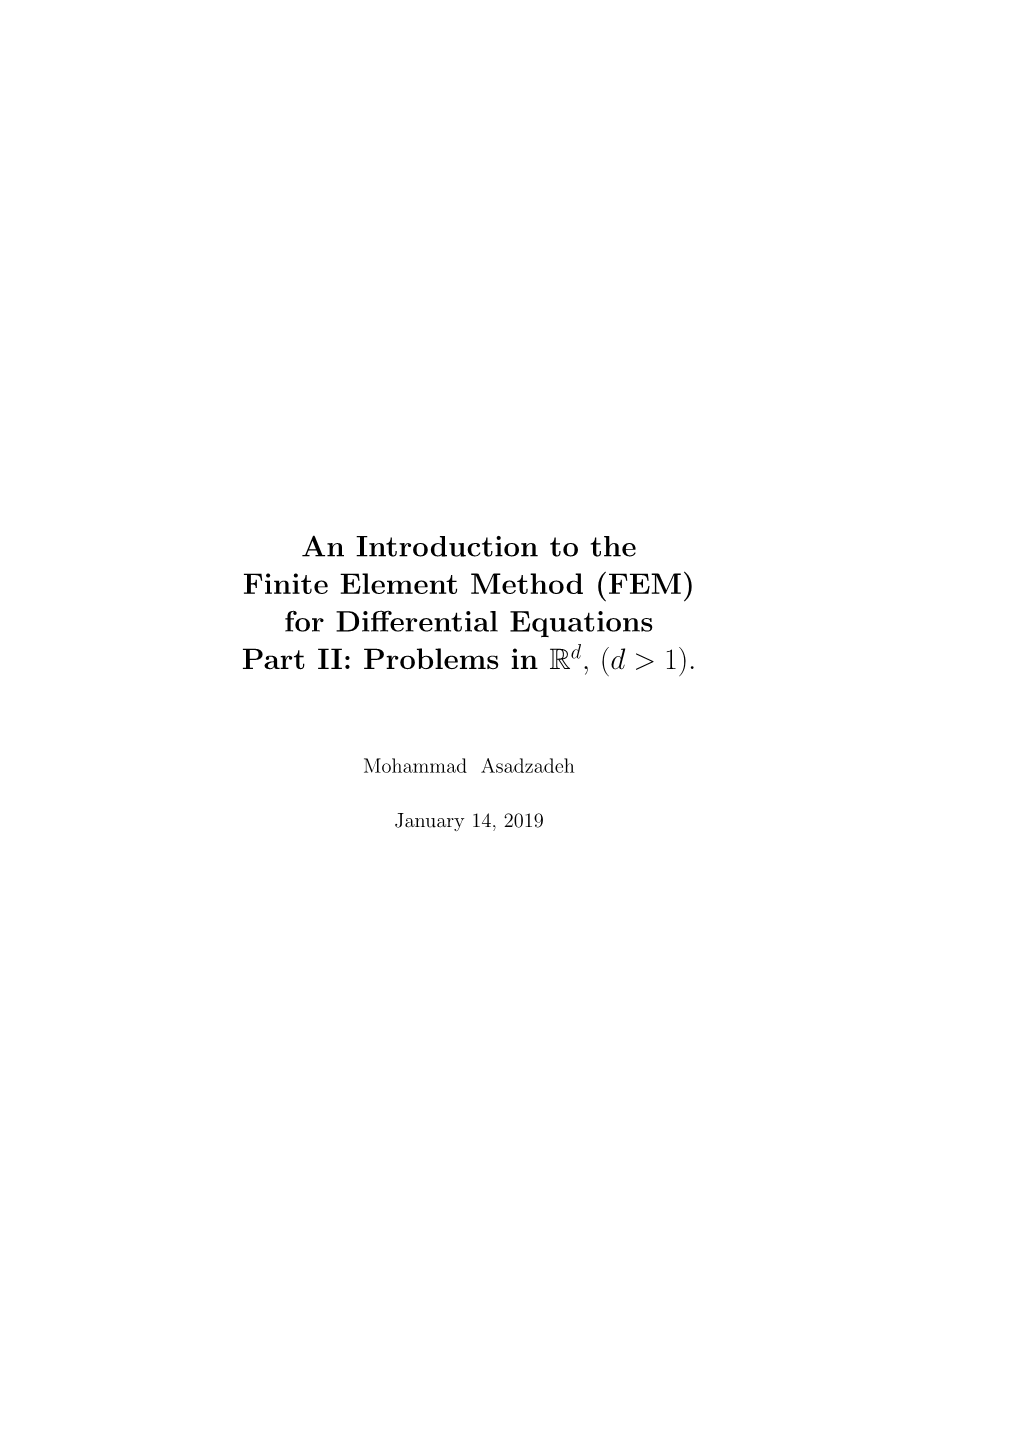 An Introduction to the Finite Element Method (FEM) for Differential Equations Part II: Problems in Rd, (D &gt;